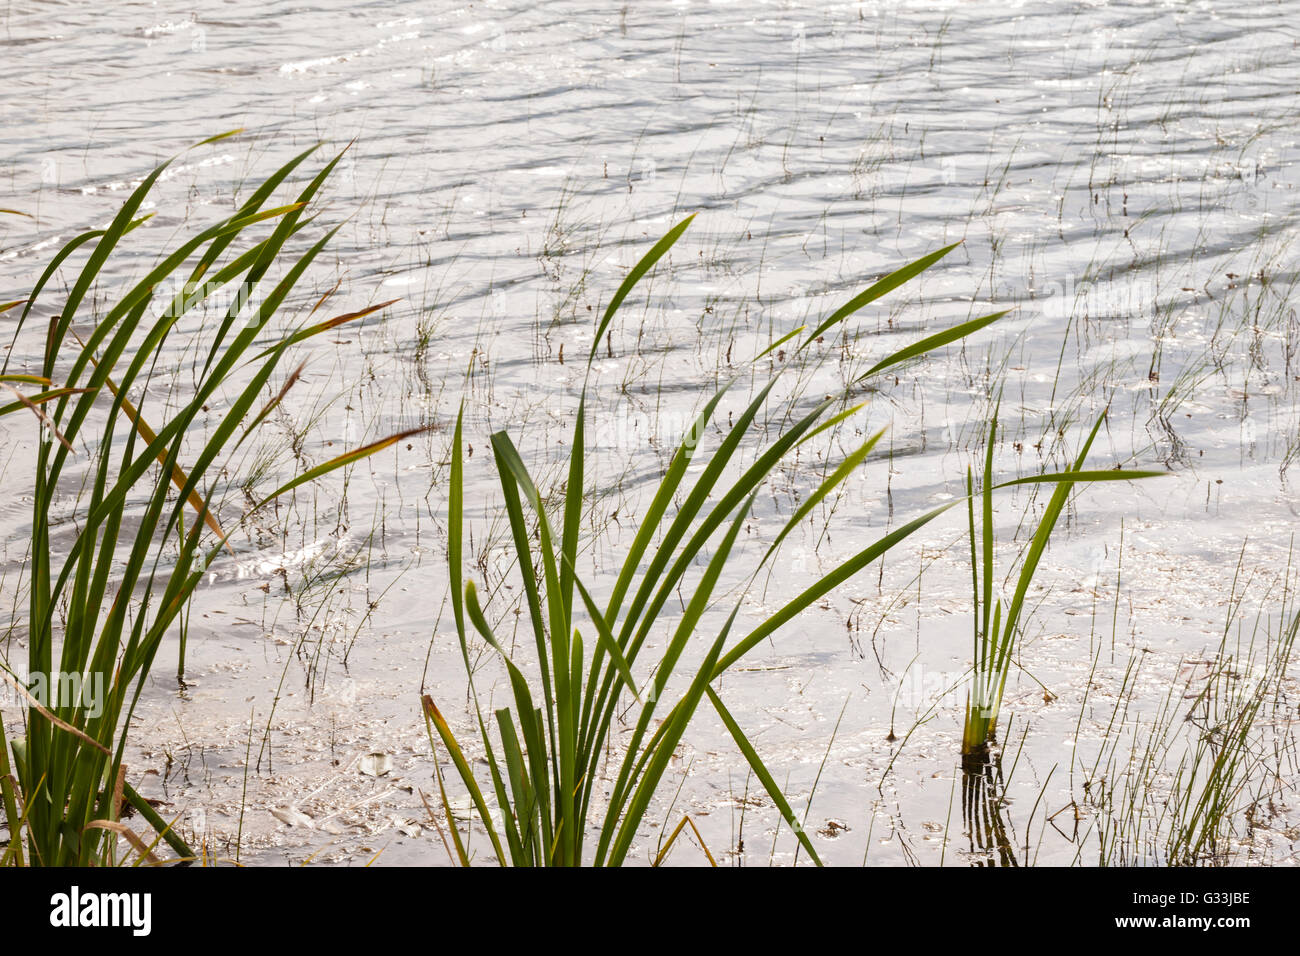 a tranquil pond with bullrushes on a calm summer day Stock Photo